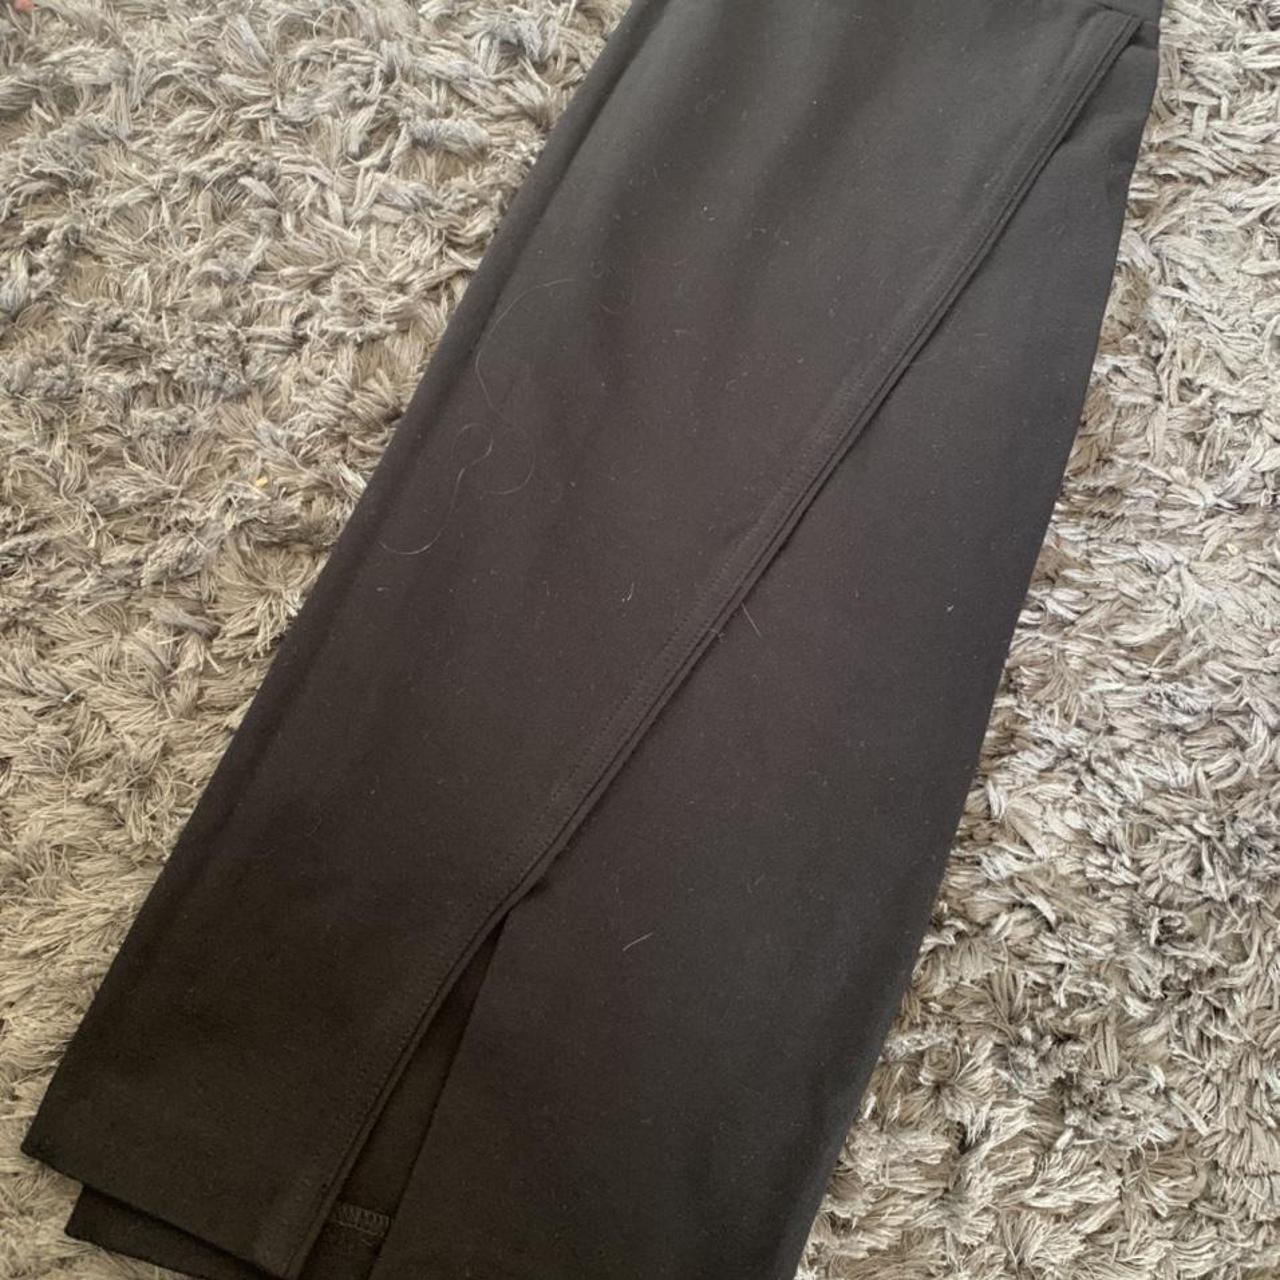 •PRINCIPLES black bodycon skirt with a small slit in... - Depop